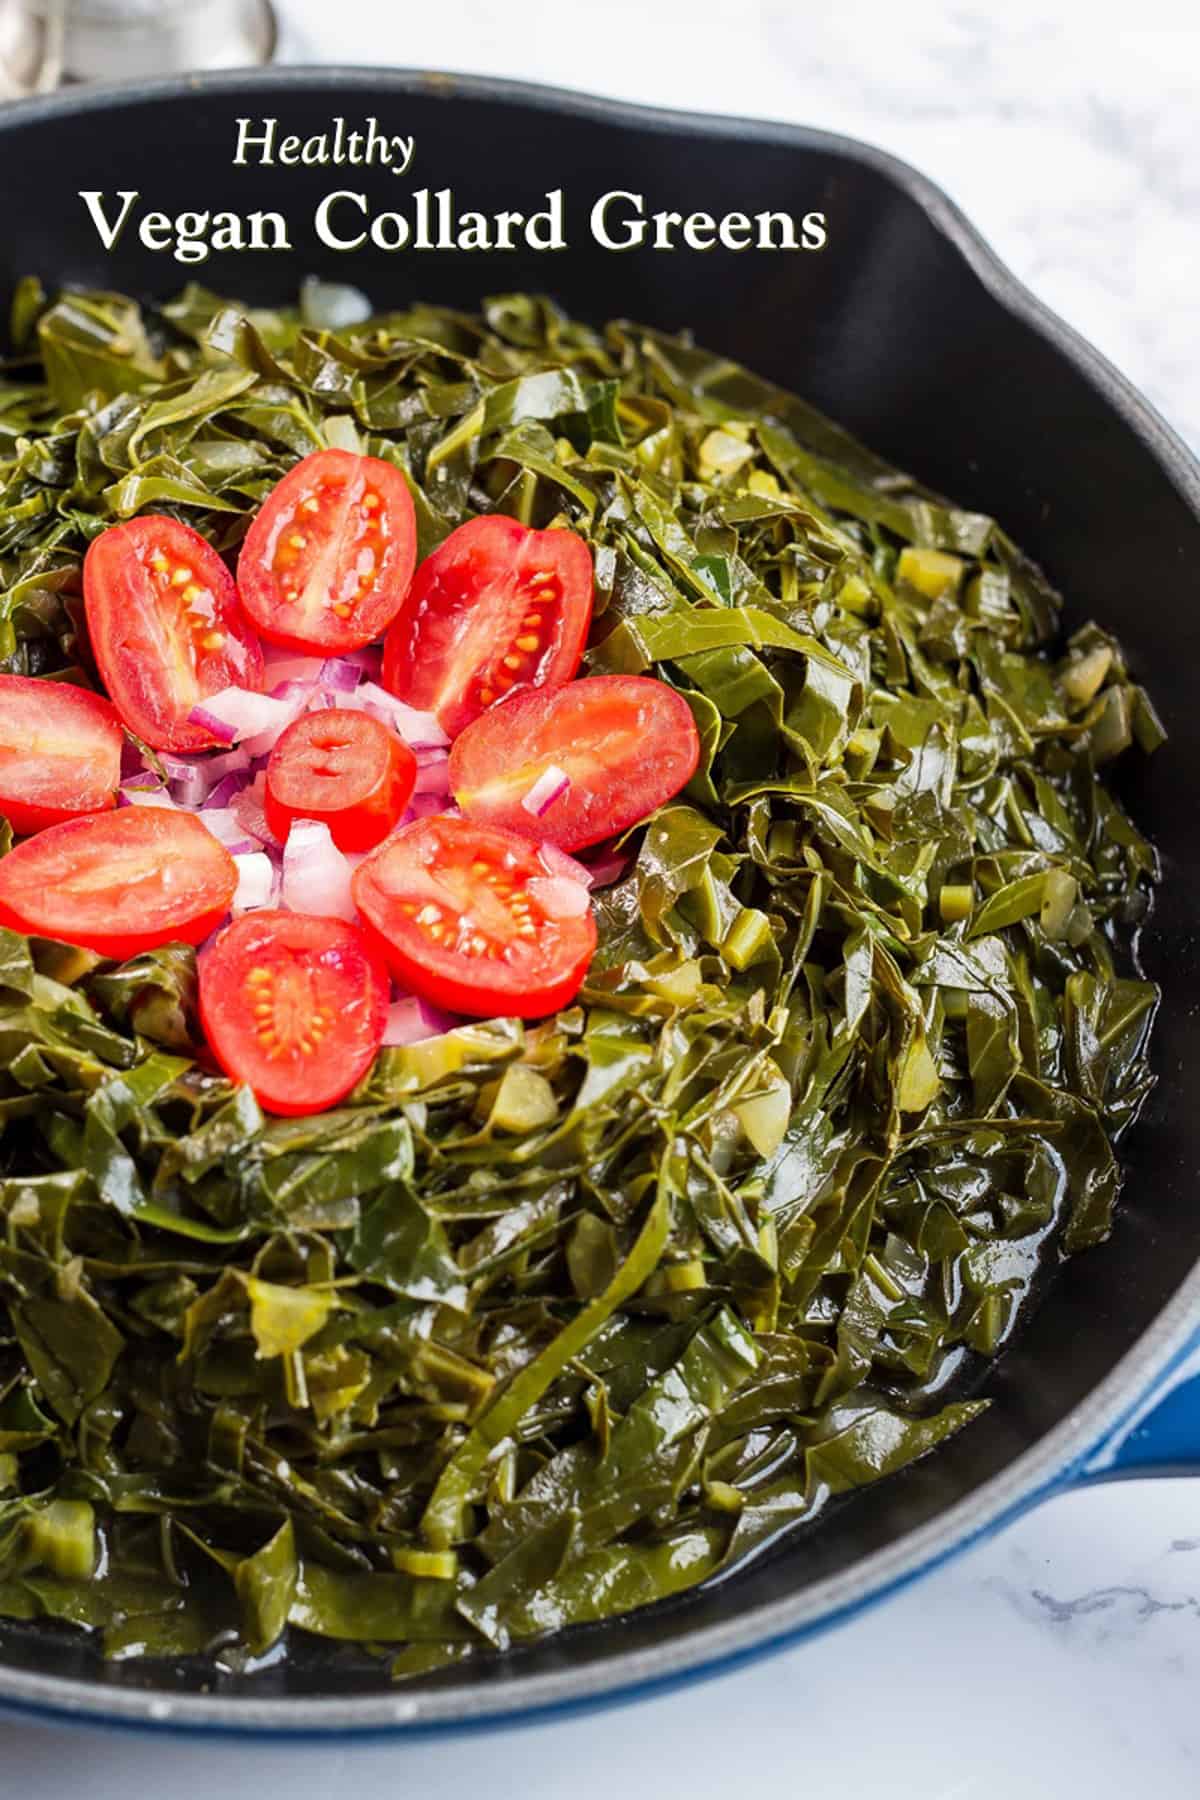 Vegan Collard Greens in a black pan with cherry tomatoes on top 